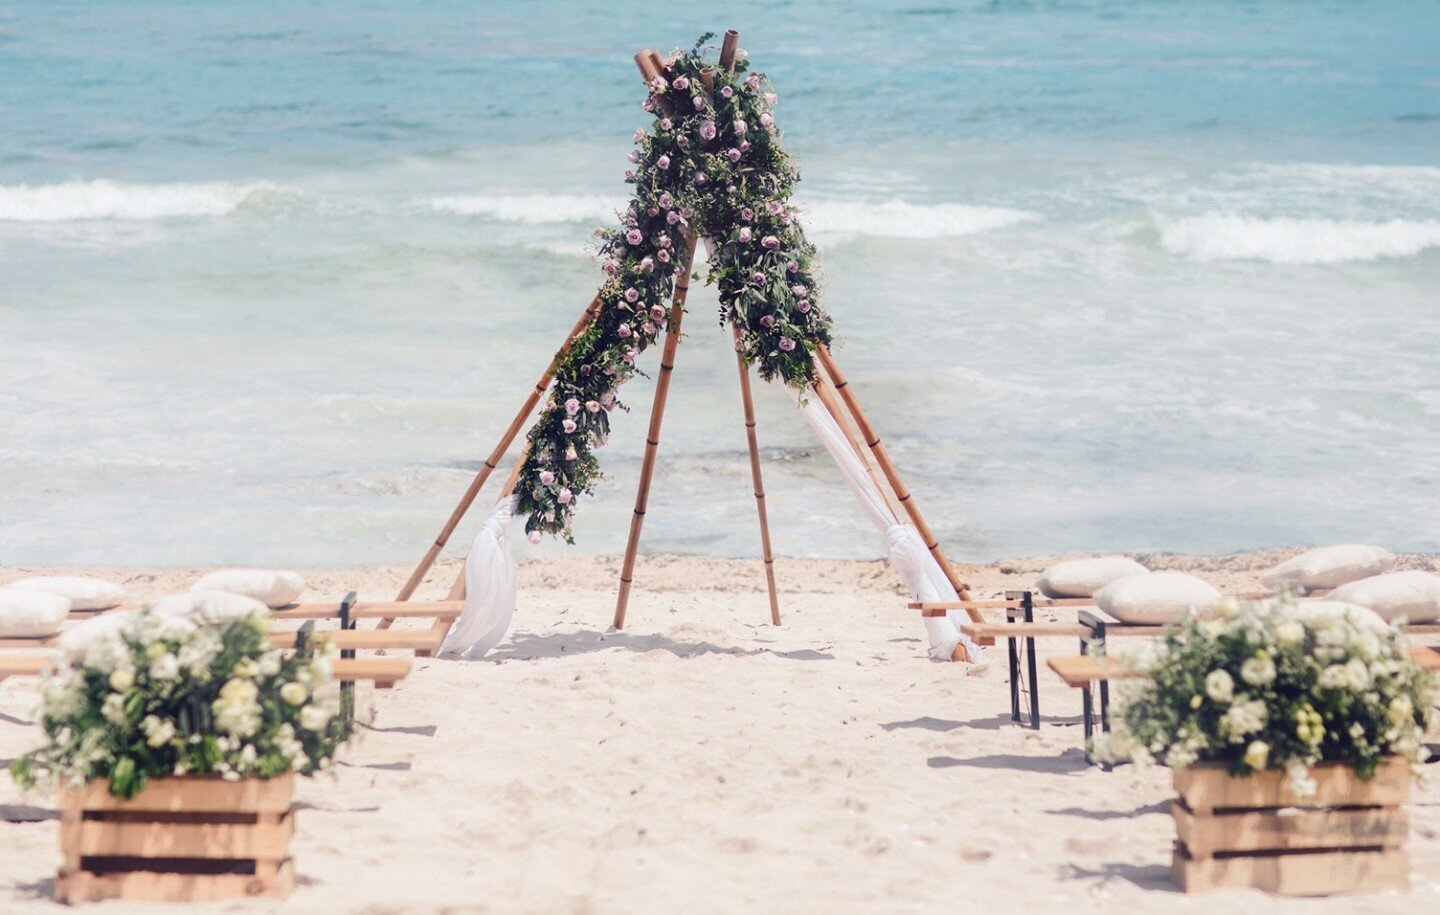 Teepee for where it's meant to be! #beachyvows⁠
⁠
Visit BeachyVows.com for the best destination wedding ideas and venues! Beachy Vows only takes on a limited number of destination weddings per year and our support is completely free.⁠
⁠
#destinationw